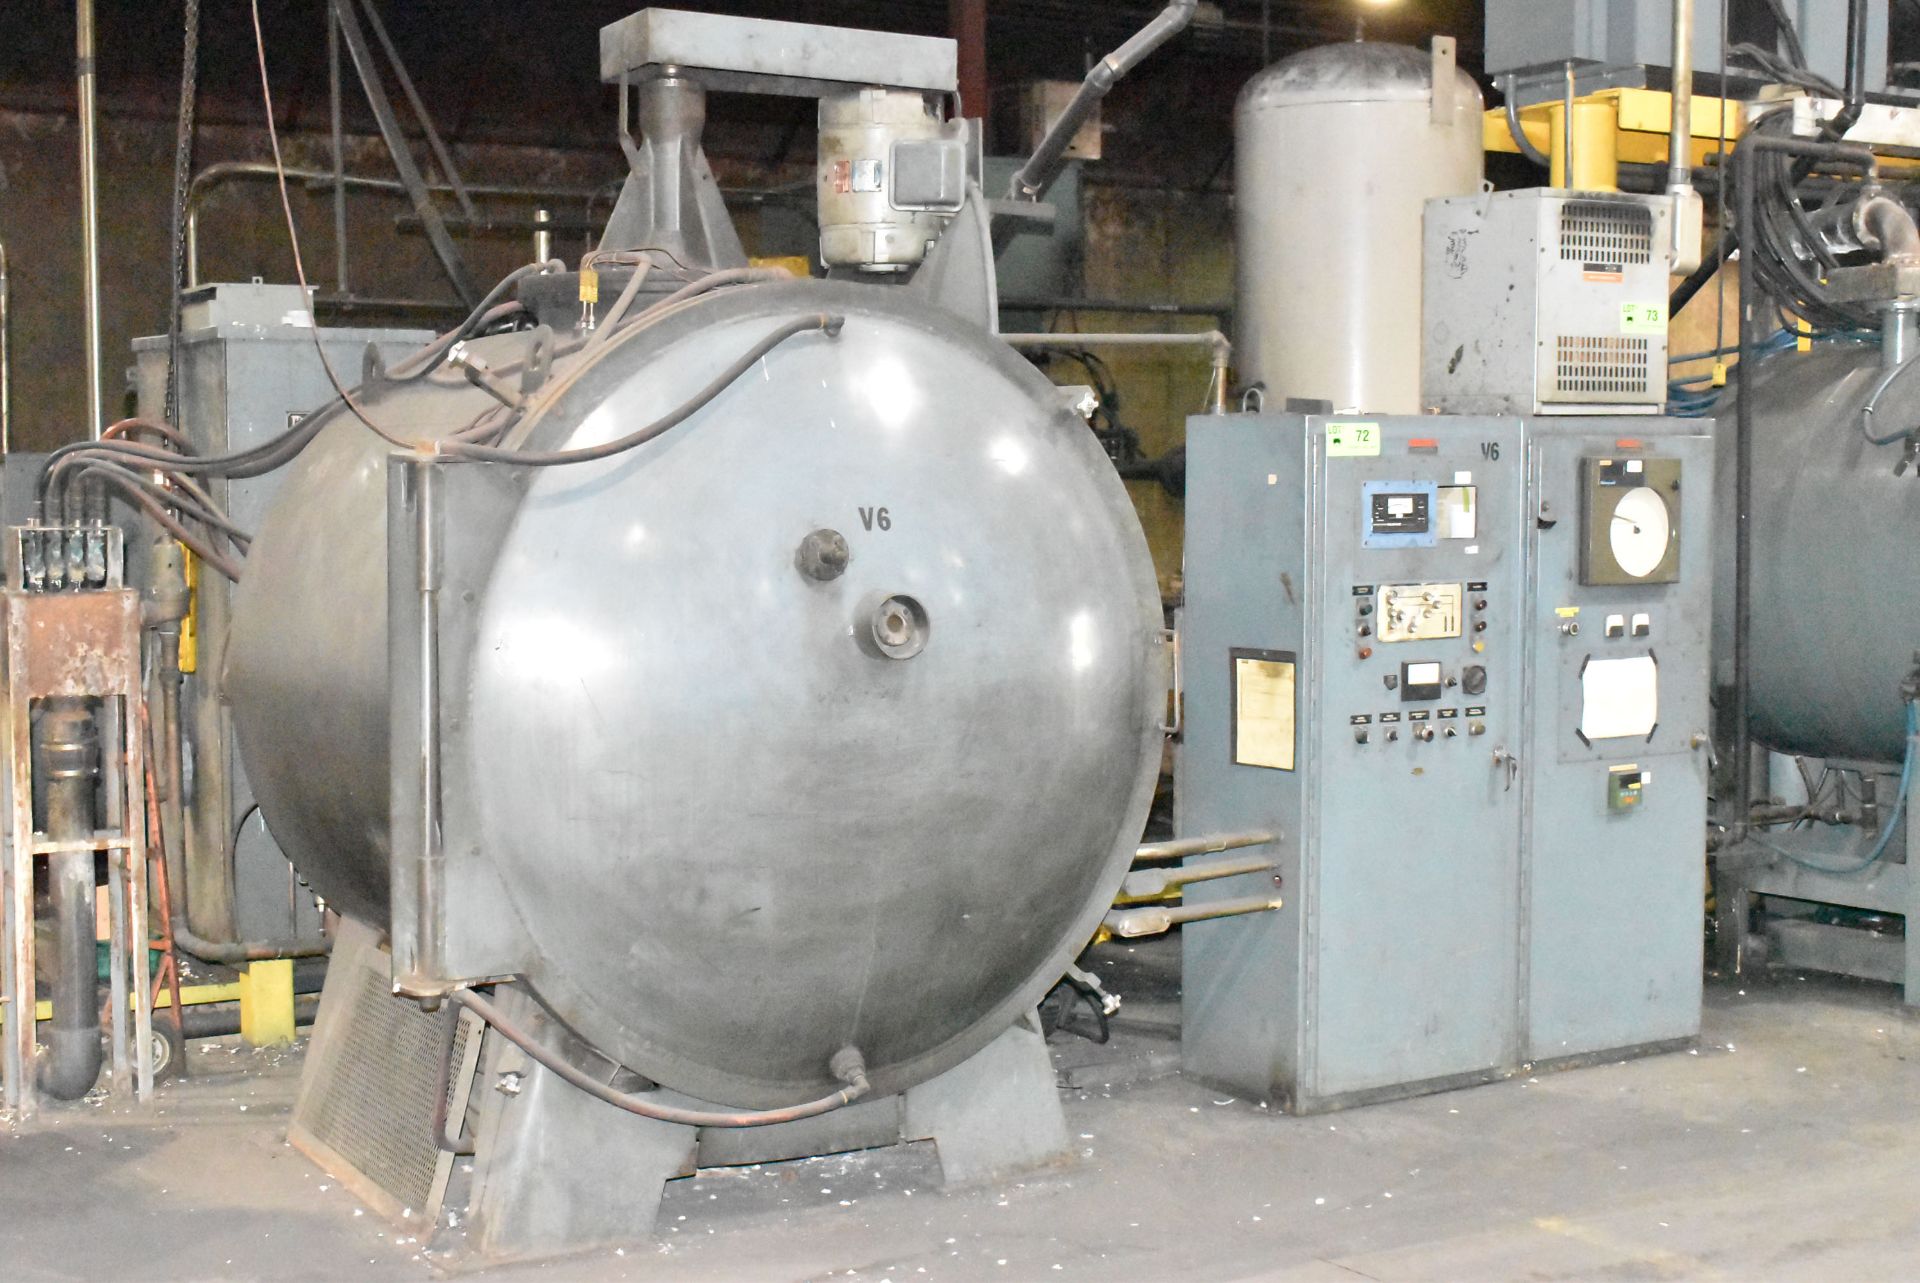 LINDBERG 21-GR-243618-21T ELECTRIC VACUUM FURNACE WITH 2,100 DEGREES F MAX TEMP, 24"Wx18"Hx36"D - Image 3 of 13